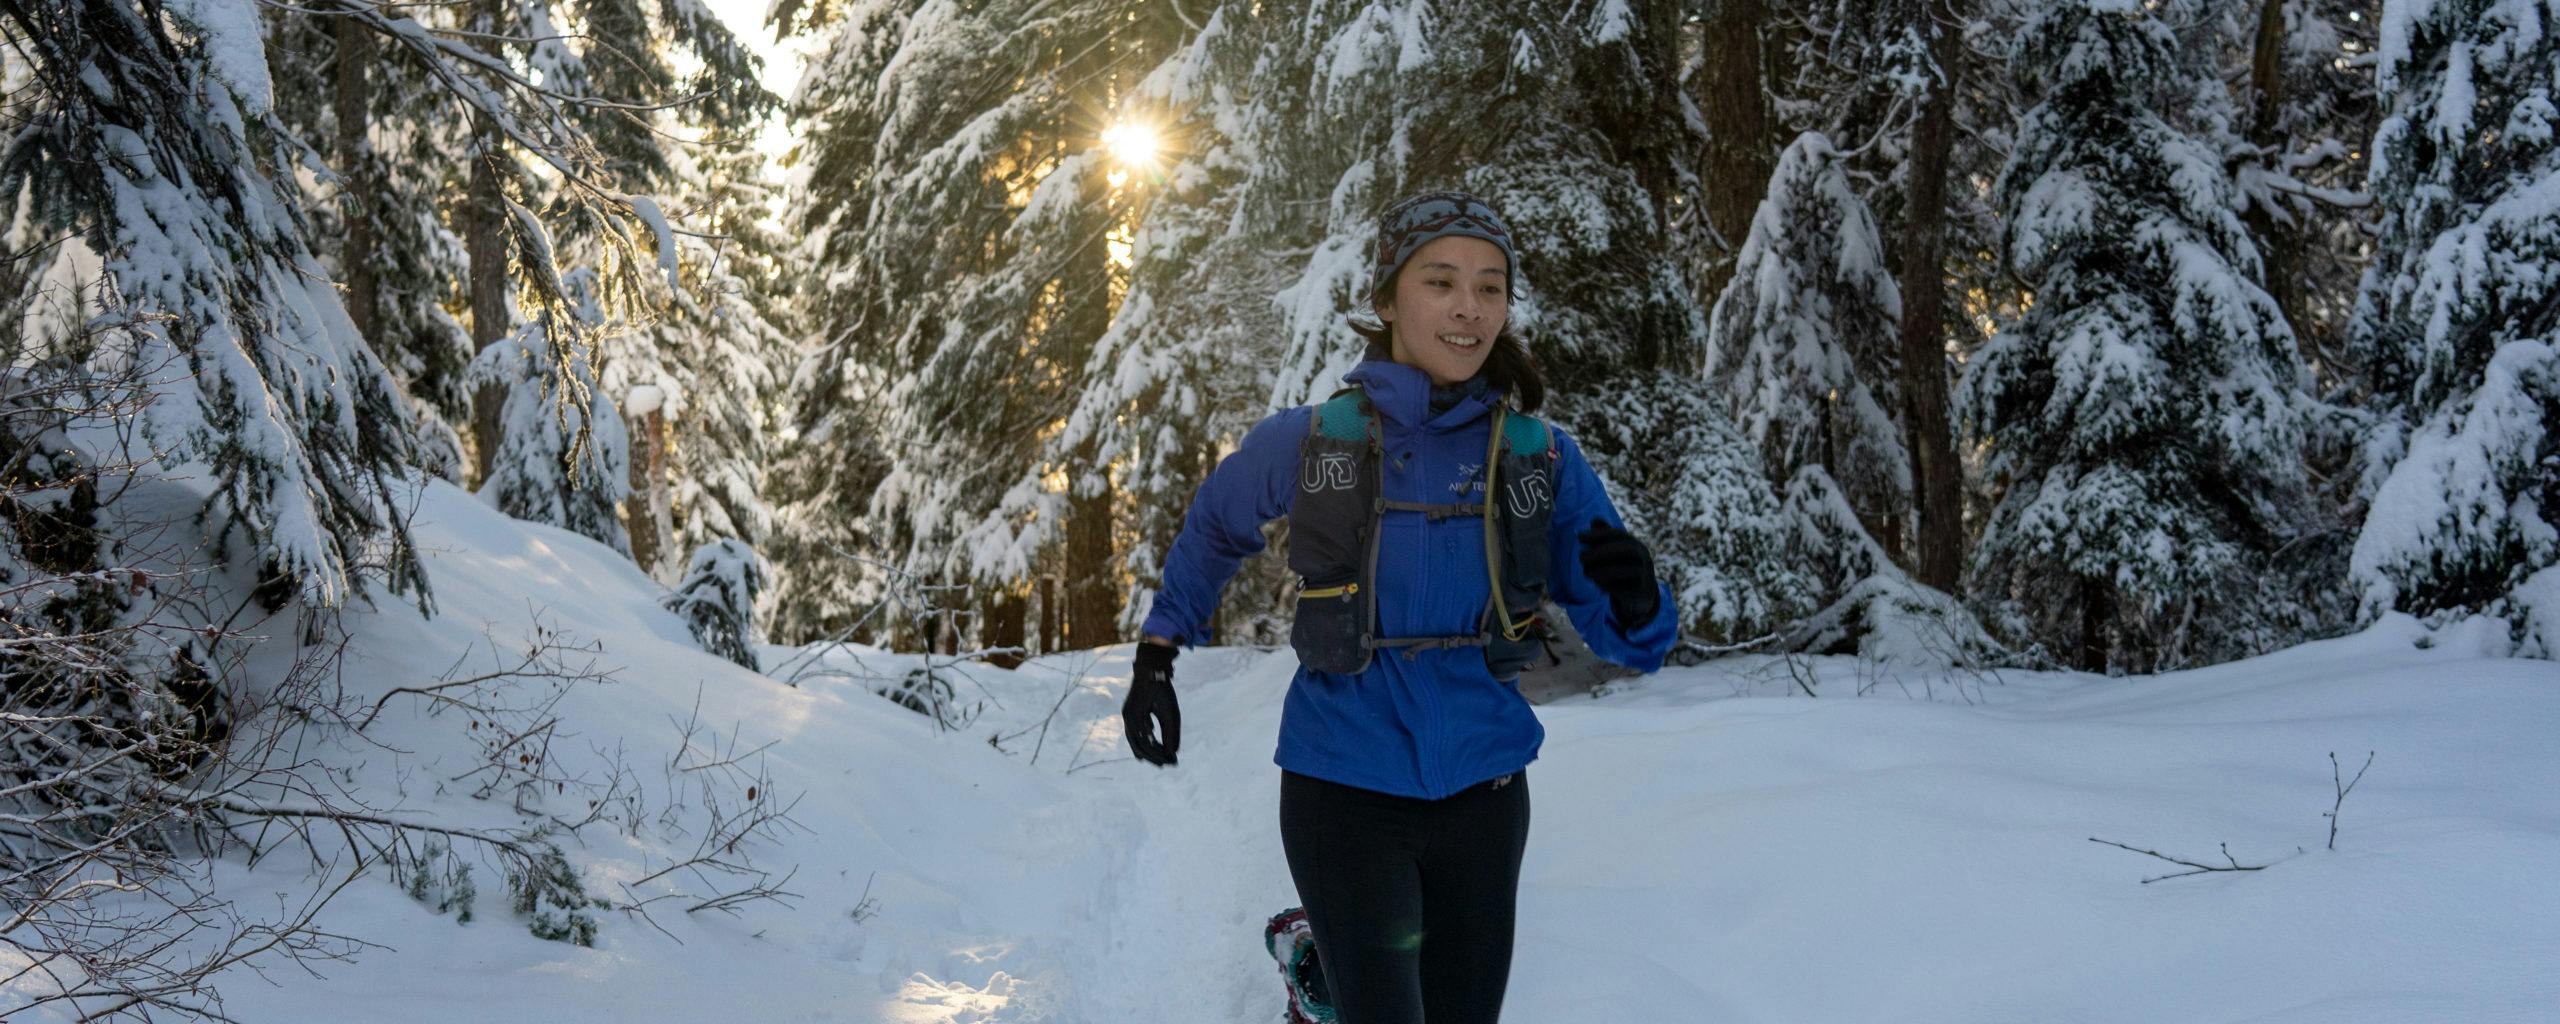 Winter running: gear and tips for cold weather